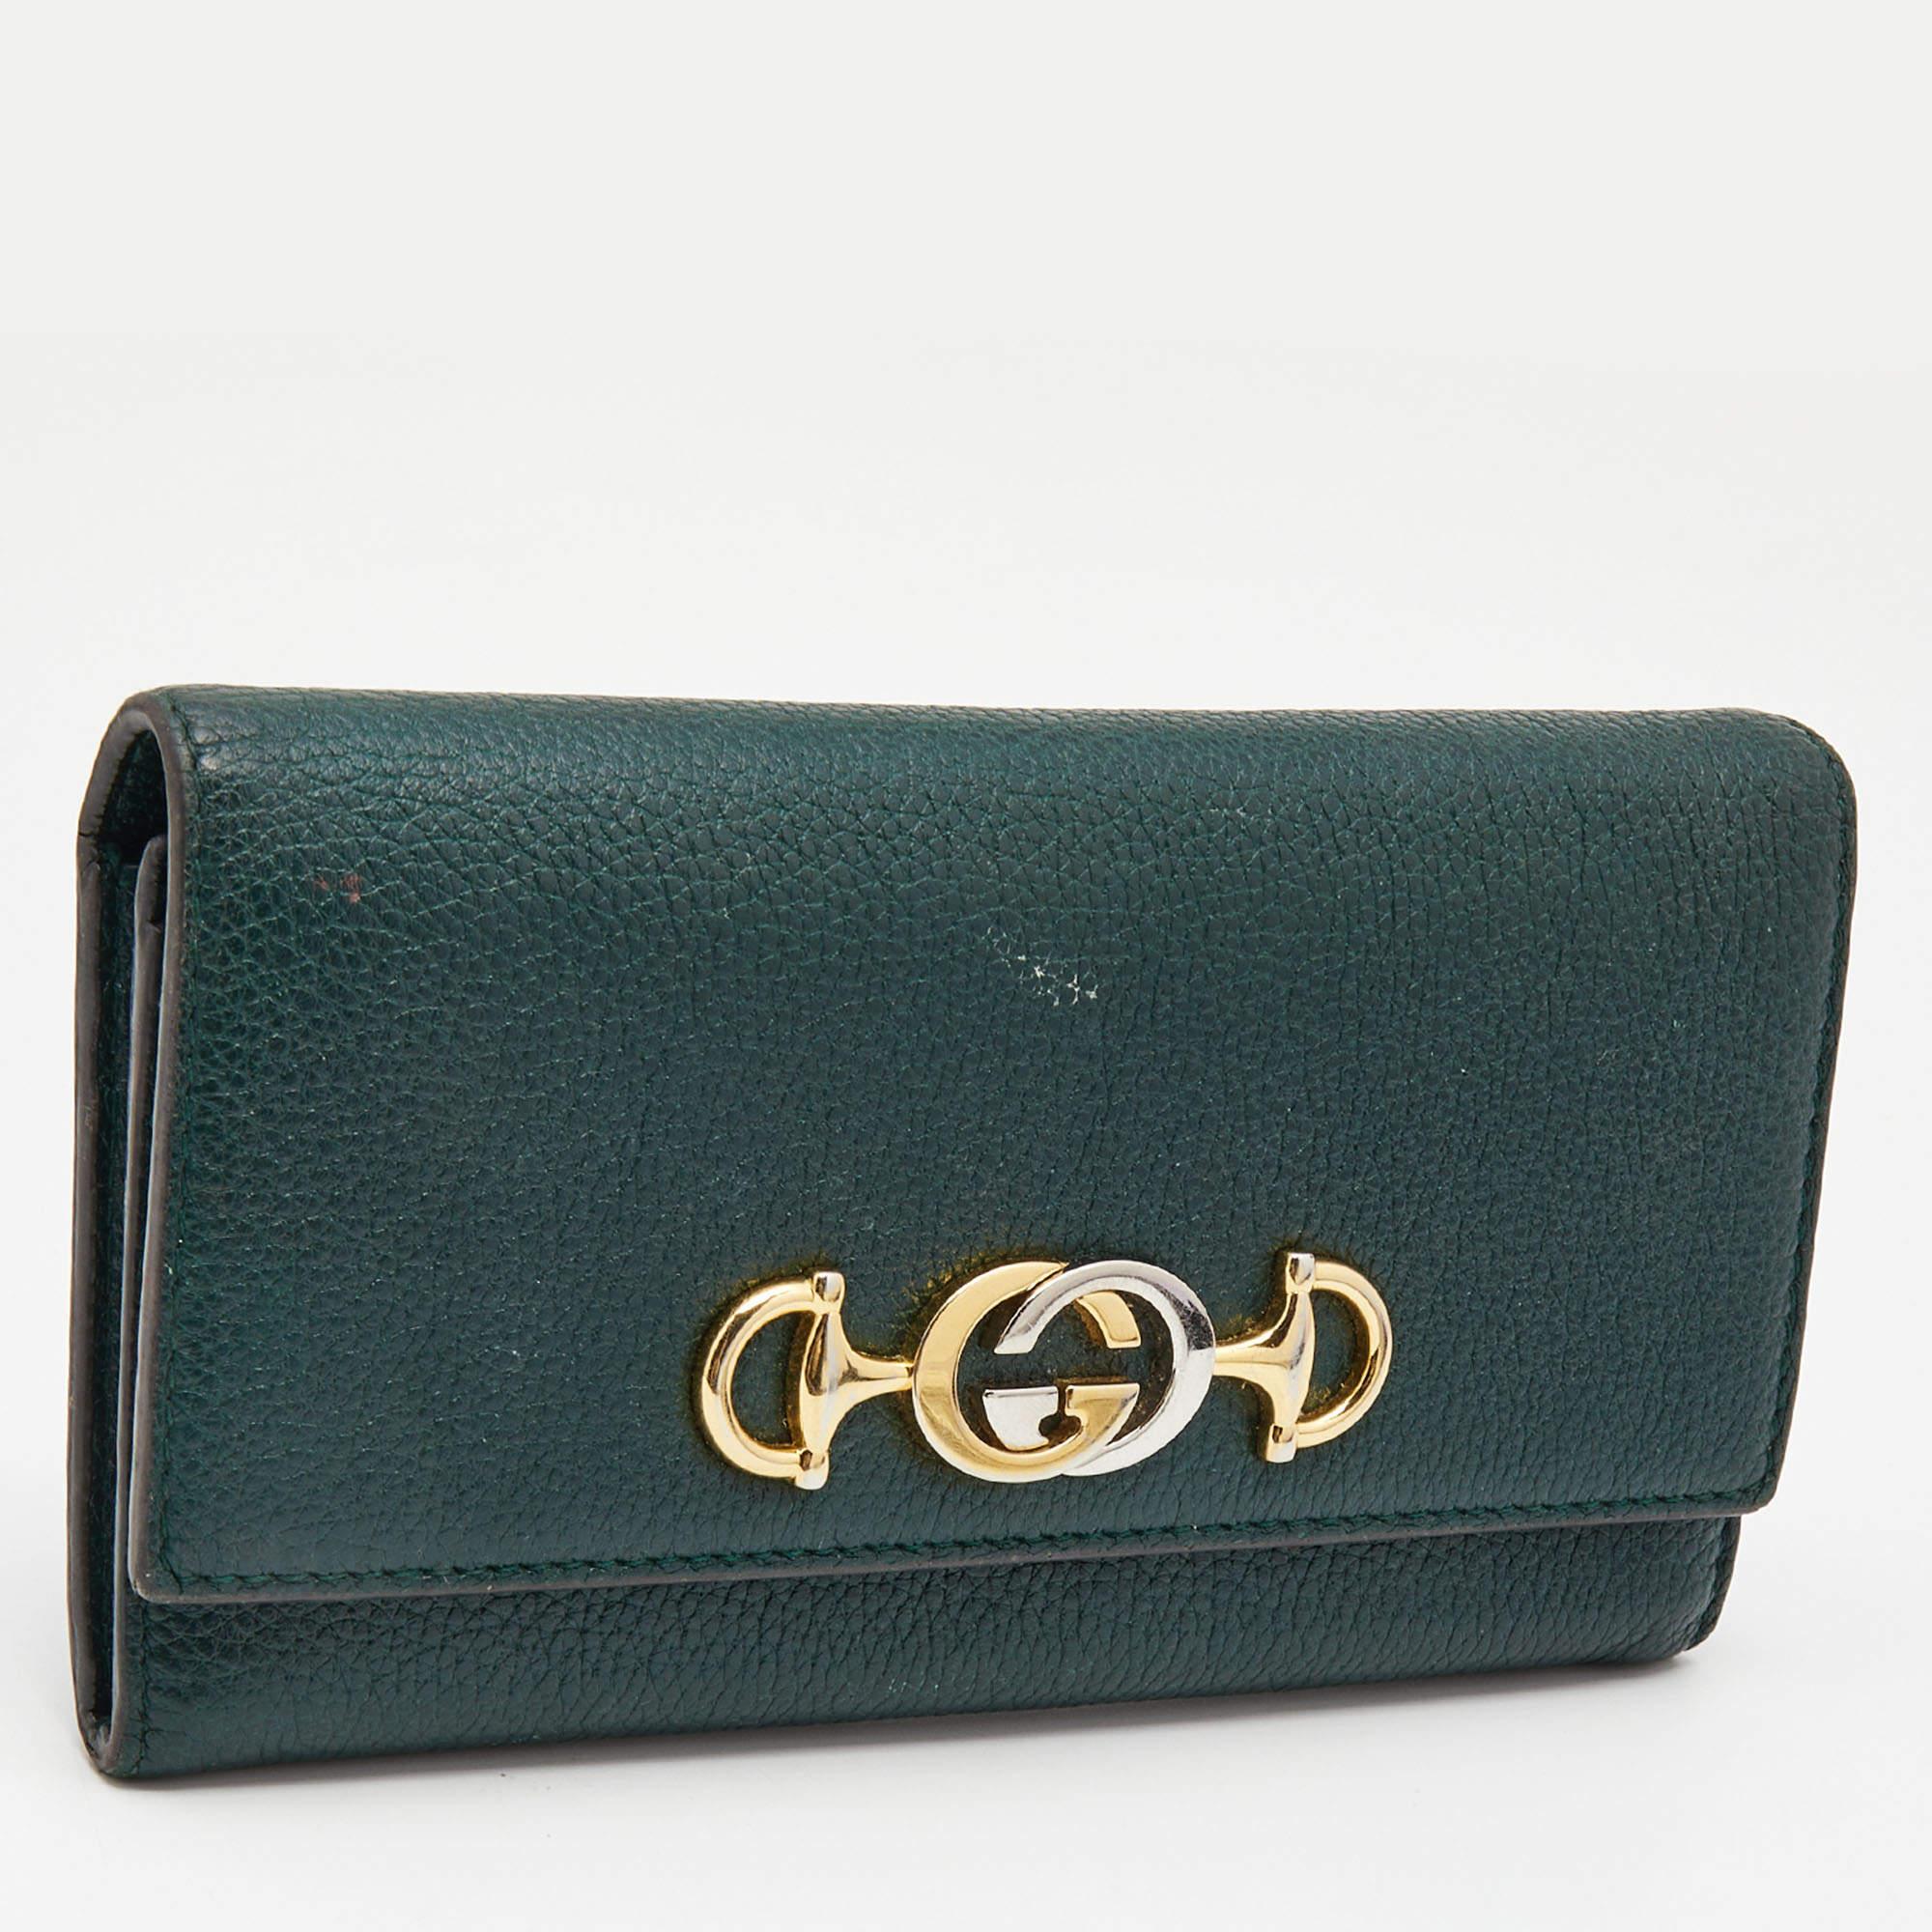 This Zumi wallet from the House of Gucci, with its multi-purposeful style and well-made shape, will prove to be your go-to accessory in no time. It has been made using green leather on the exterior.

